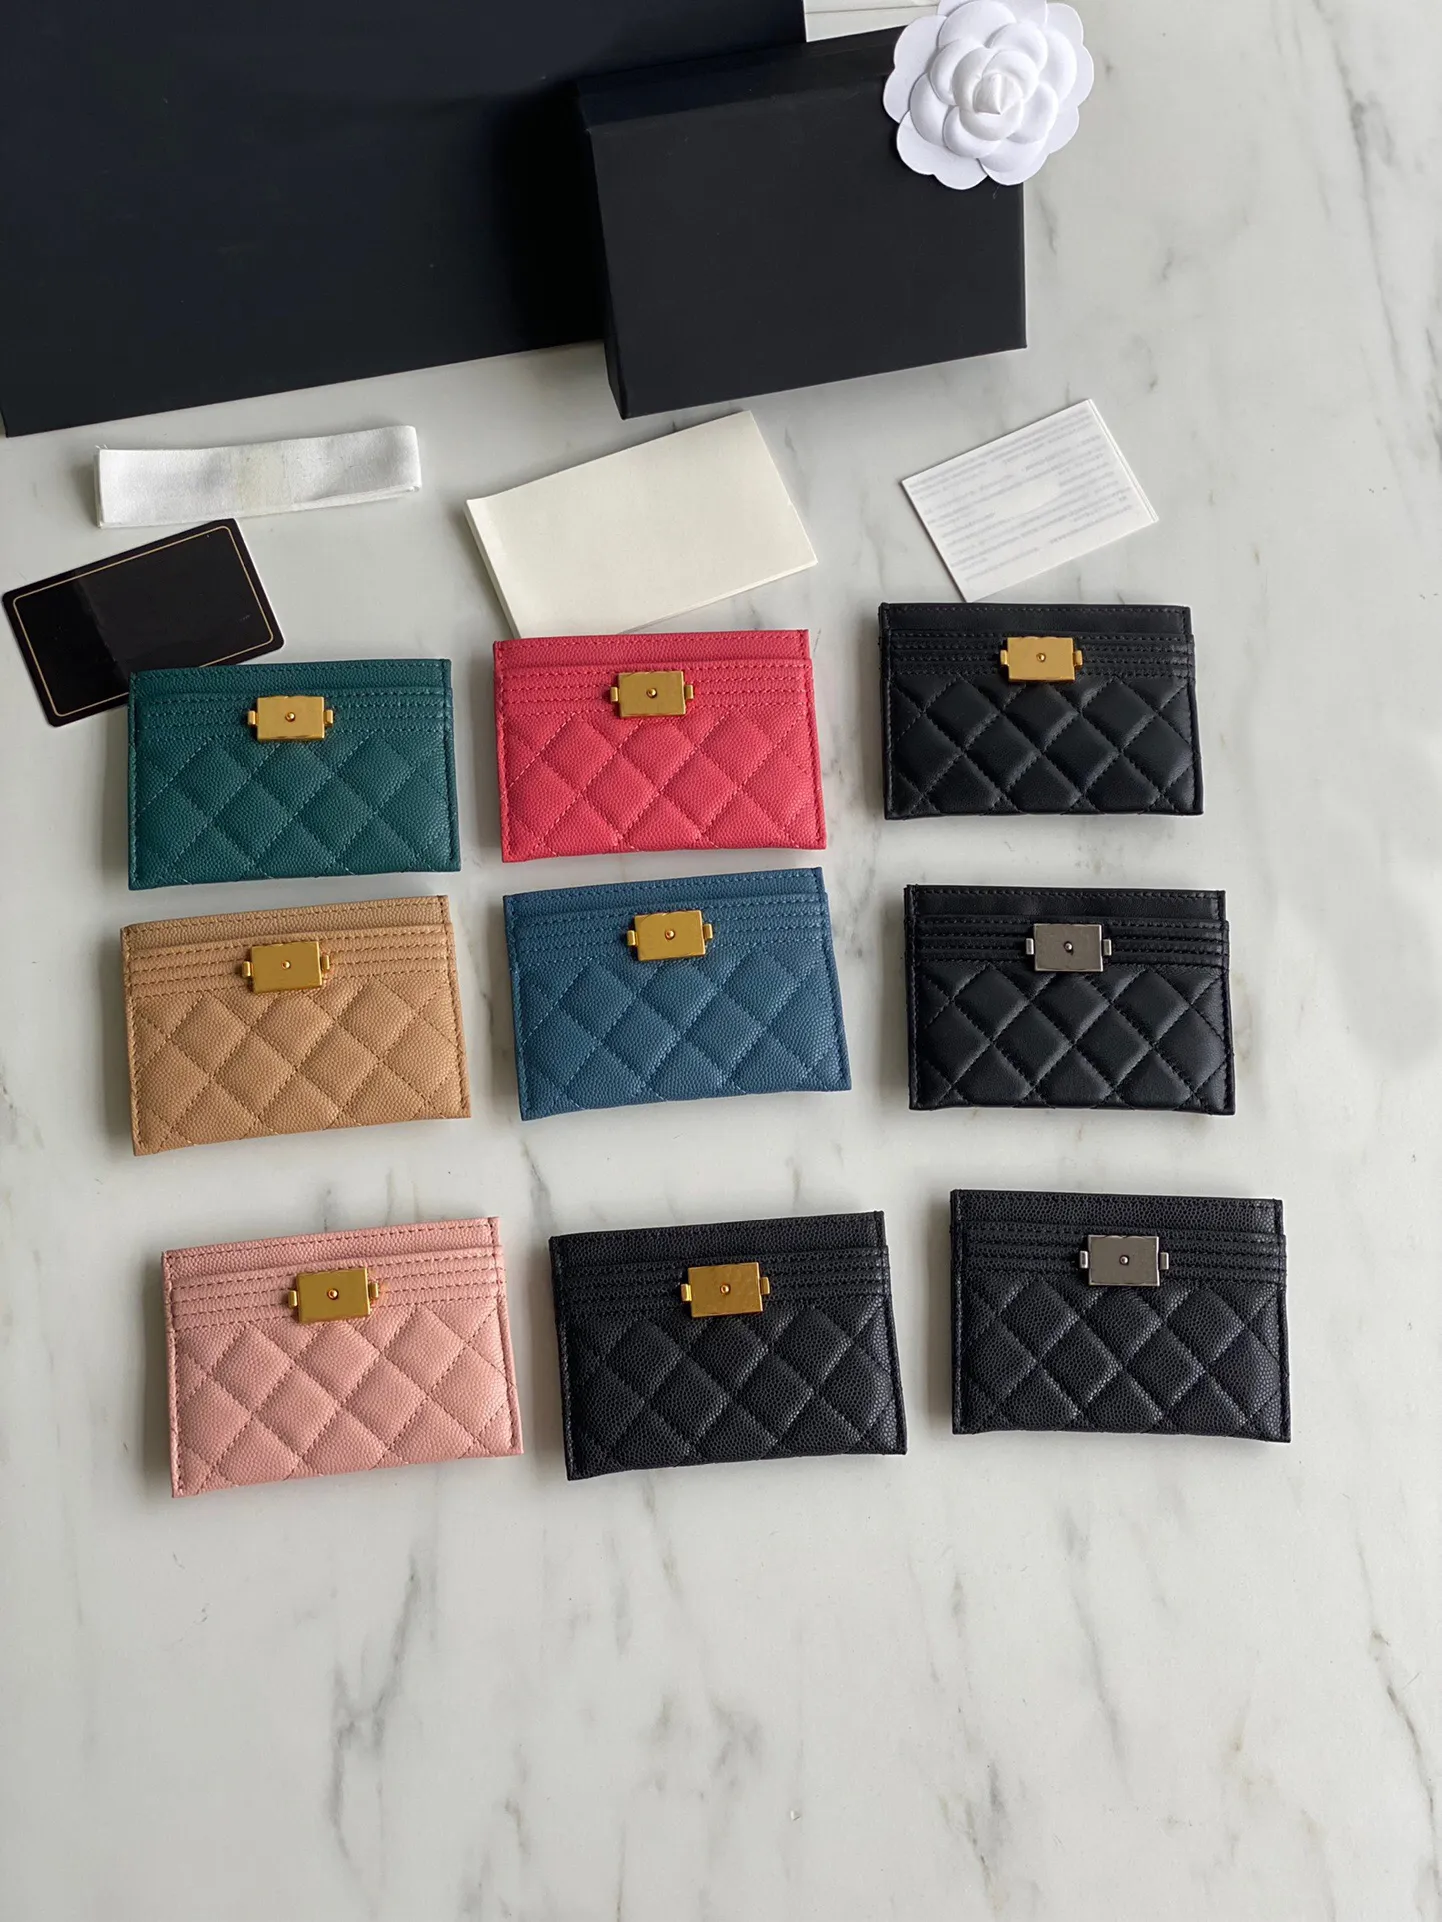 10A Bästa kvalitetskorthållare med Box Real Leather Caviar Wallet Black Quilted Coin Purse Lady Credit Card Holder Luxury Designers 16